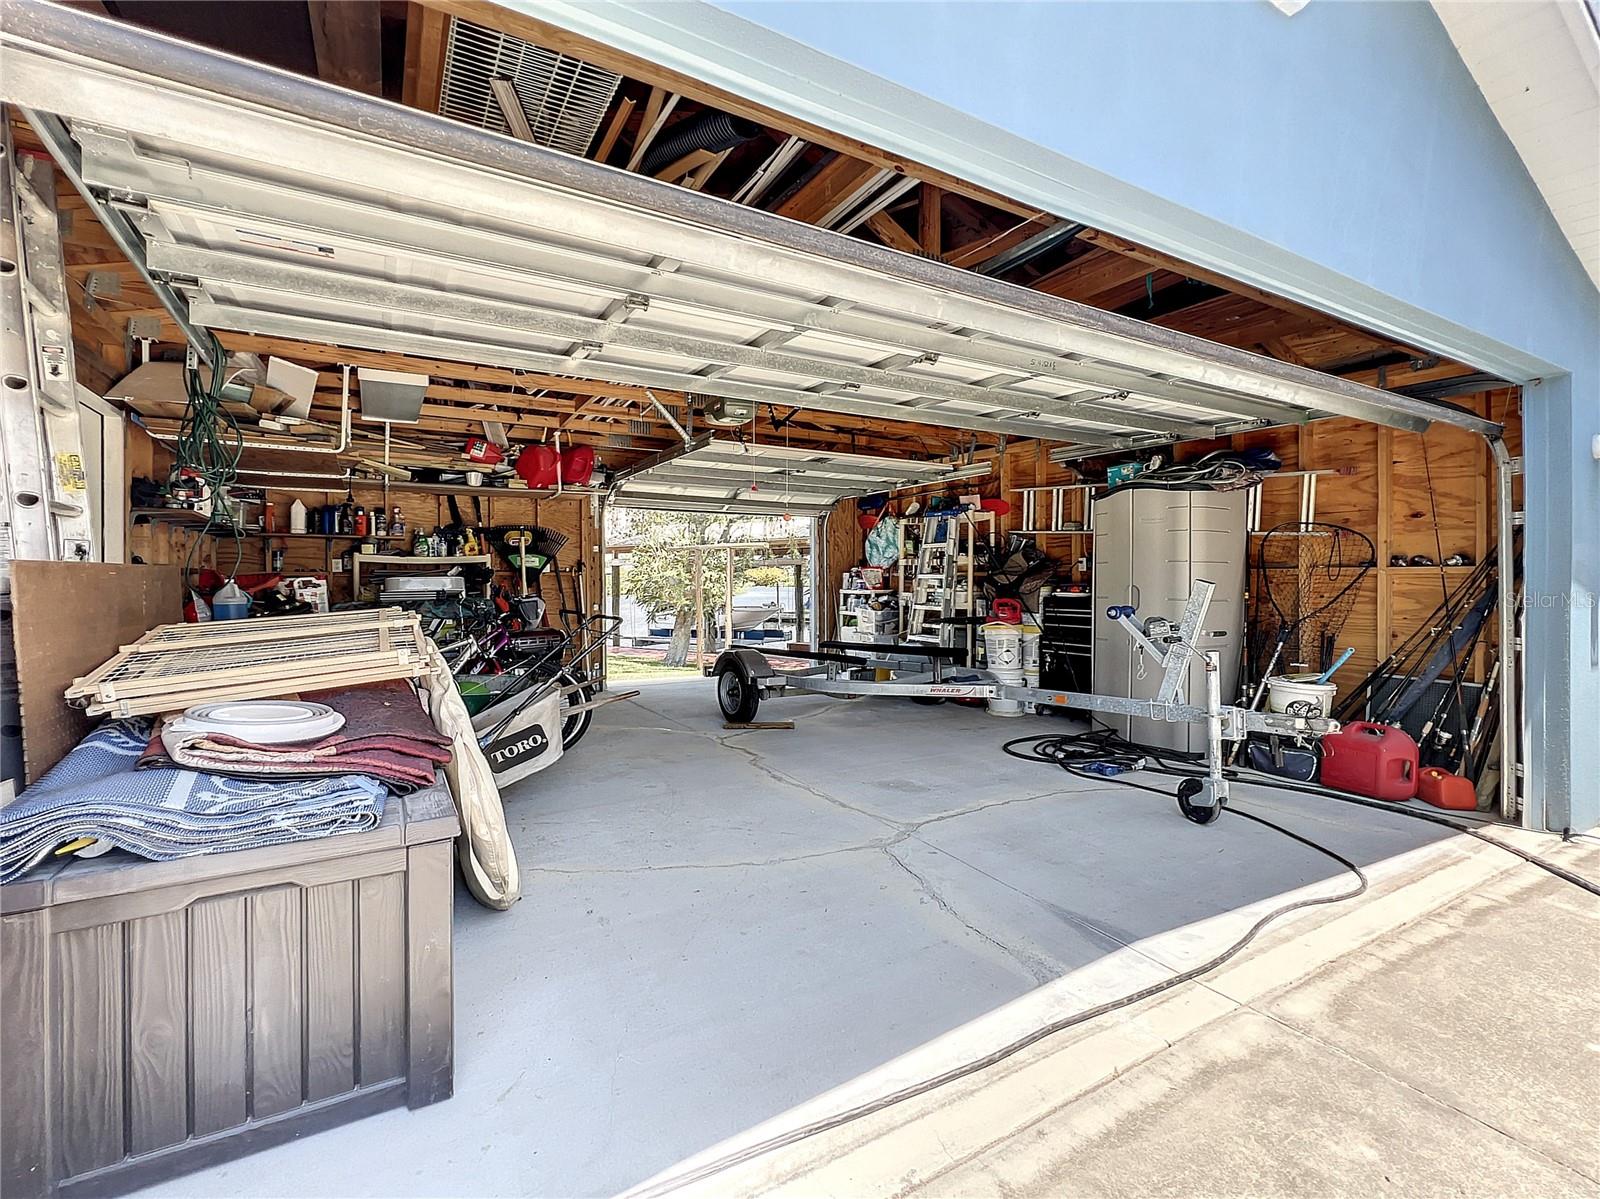 2-Car Garage with 1 Car Drive-Through making it simple to move Jet-ski's/Kayaks/paddleboards in and out effortlessly